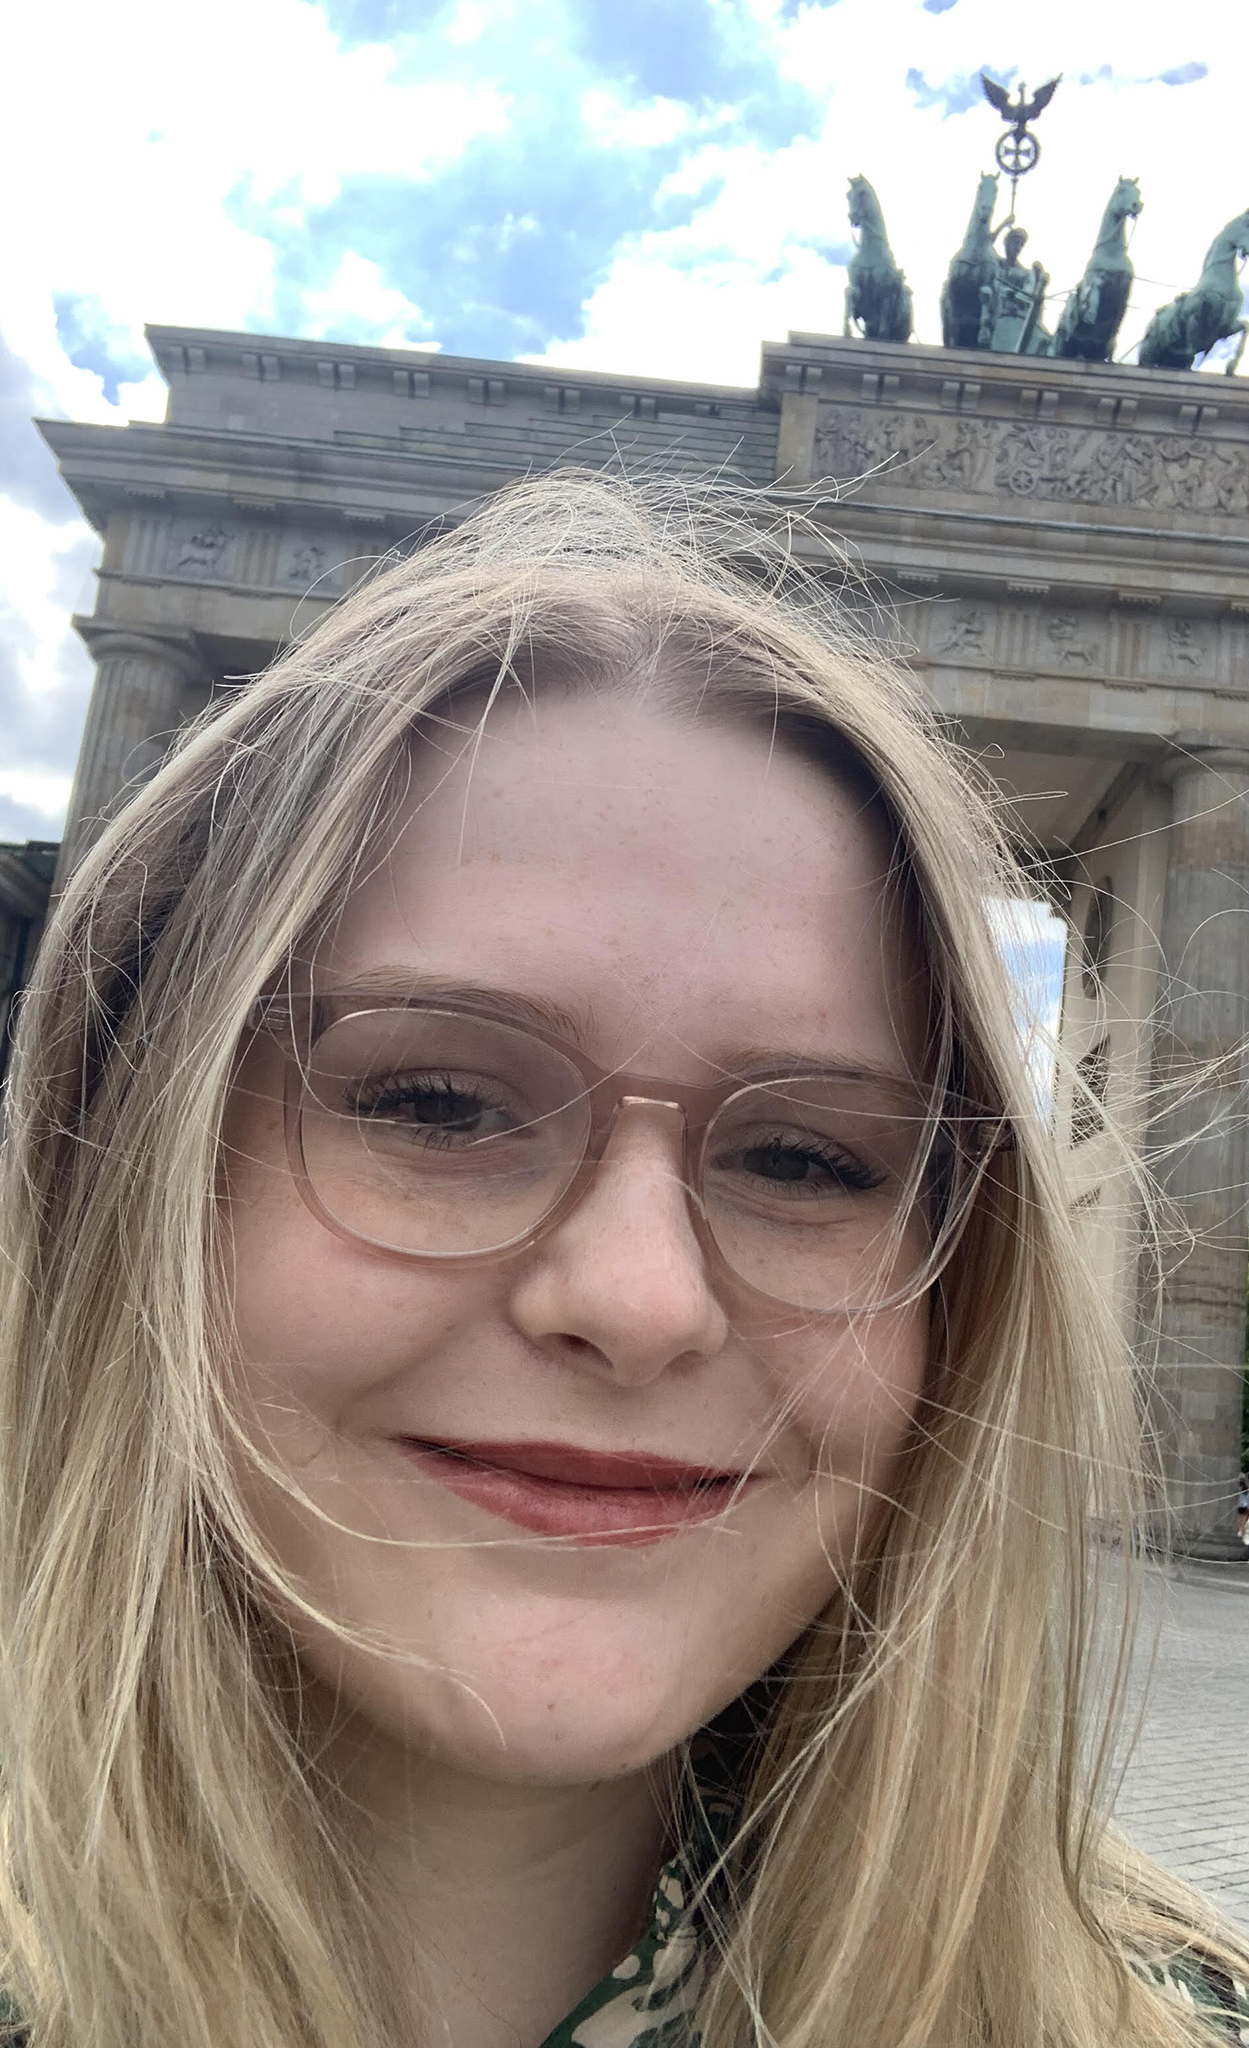 Savannah Whittemore visits the Brandenberg Gate in Berlin while interning in Germany with the German American Exchange program. Submitted photo